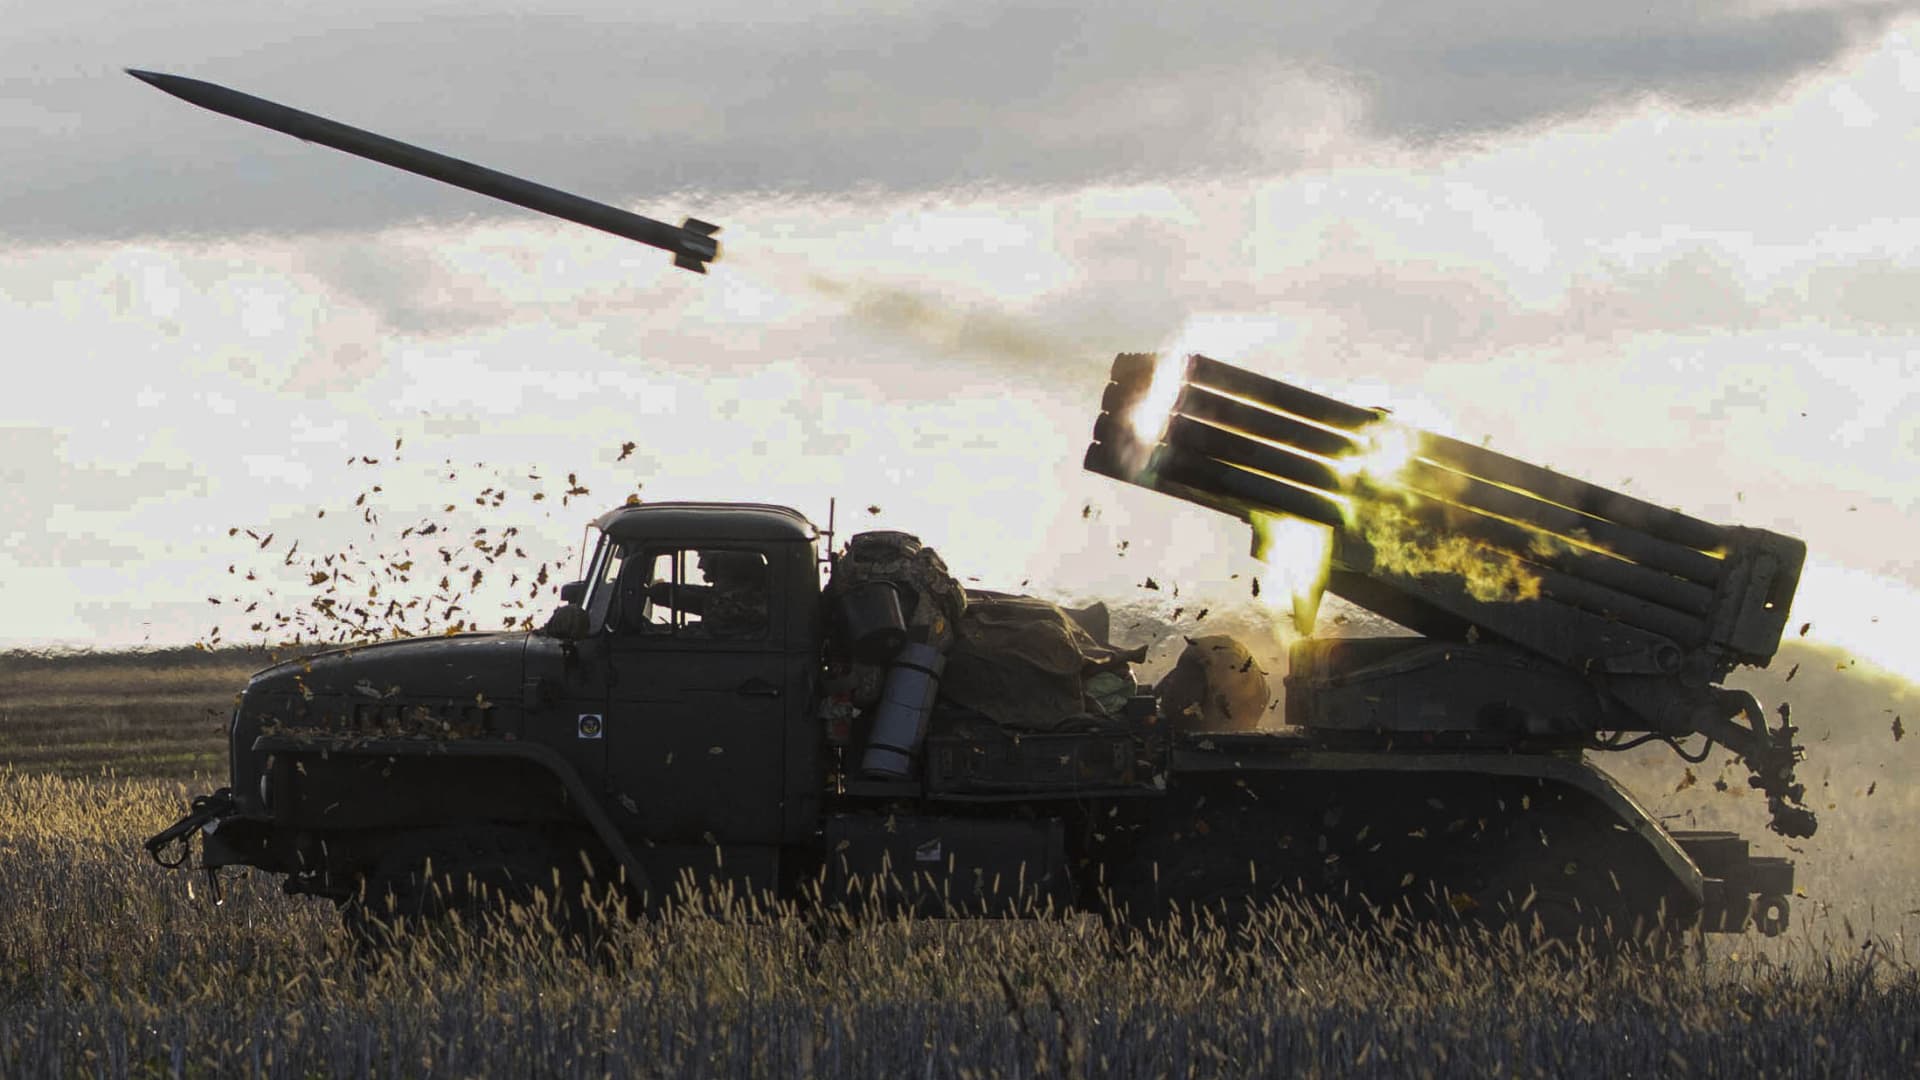 A Ukrainian rocket launches from a vehicle of the 53rd Mechanized Brigade of the Ukrainian Military forces in Donetsk Oblast on October 28, 2022.